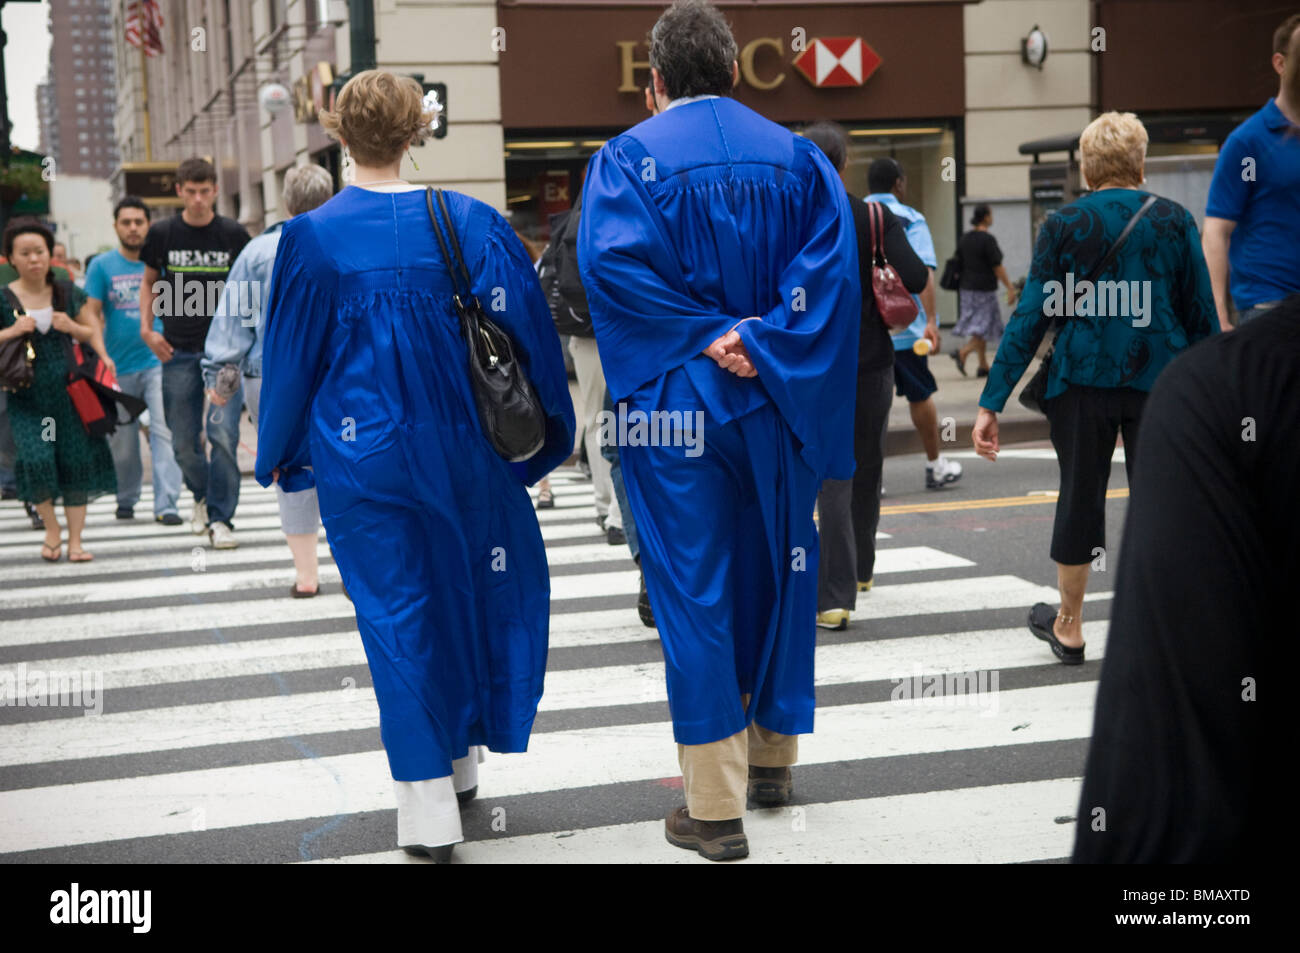 People wearing graduation gowns cross a street in midtown in New York on Thursday, May 27, 2010.(© Frances M. Roberts) Stock Photo